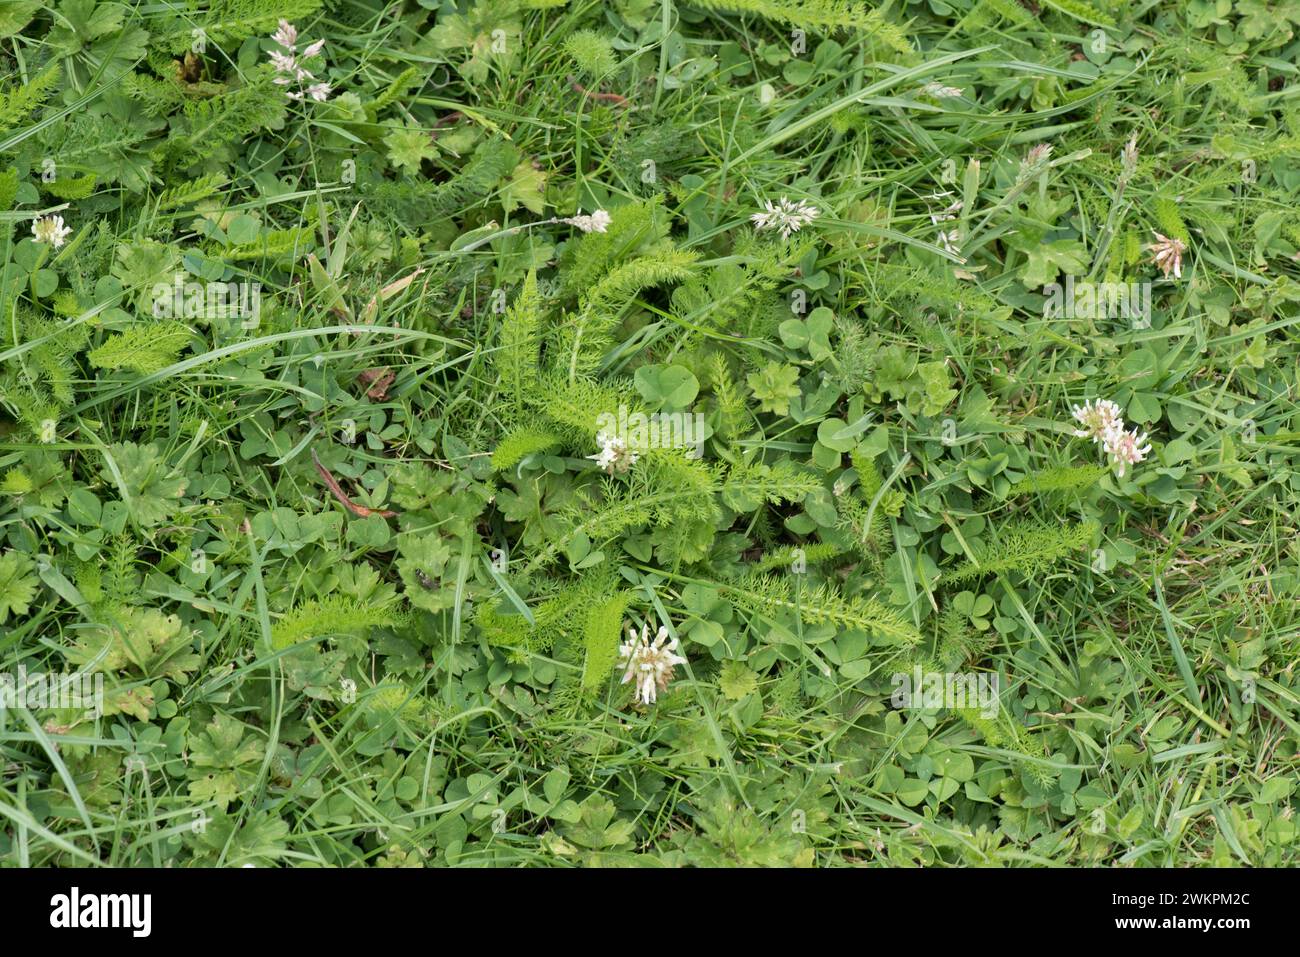 Broad leaved weeds (white clover, yarrow) growing in a mown garden lawn flowering for pollinators and foraging invertebrates, Berkshire, June Stock Photo